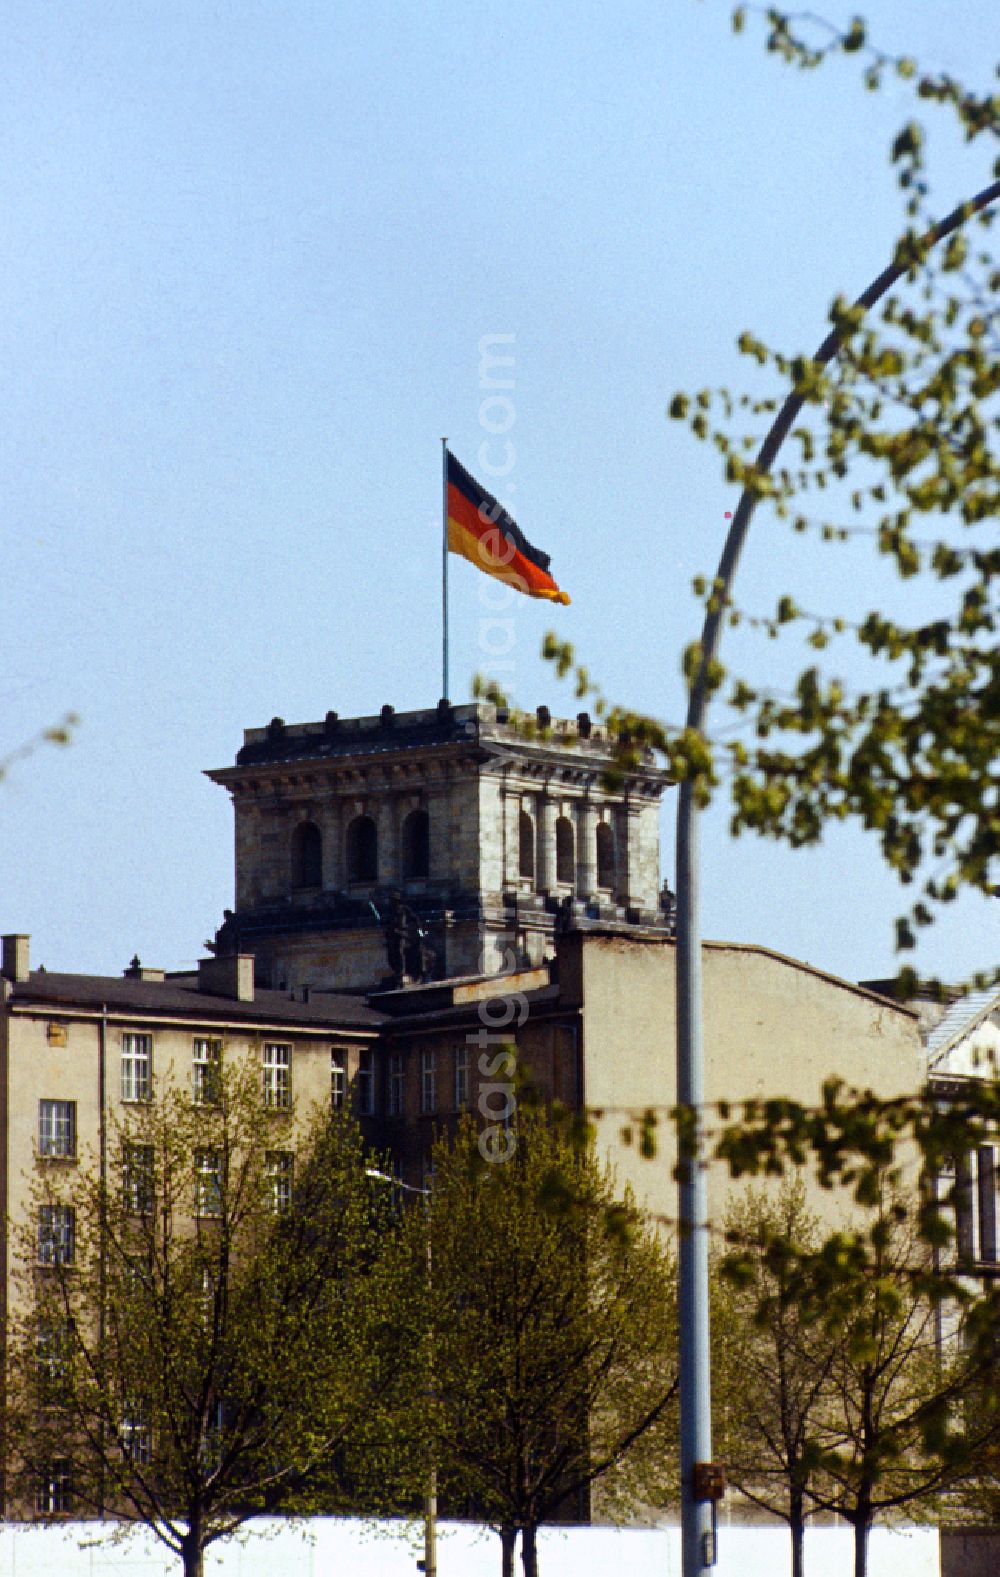 GDR photo archive: Berlin - View over the wall towards the Reichstag with tower and Germany flag in Berlin-Mitte on the territory of the former GDR, German Democratic Republic